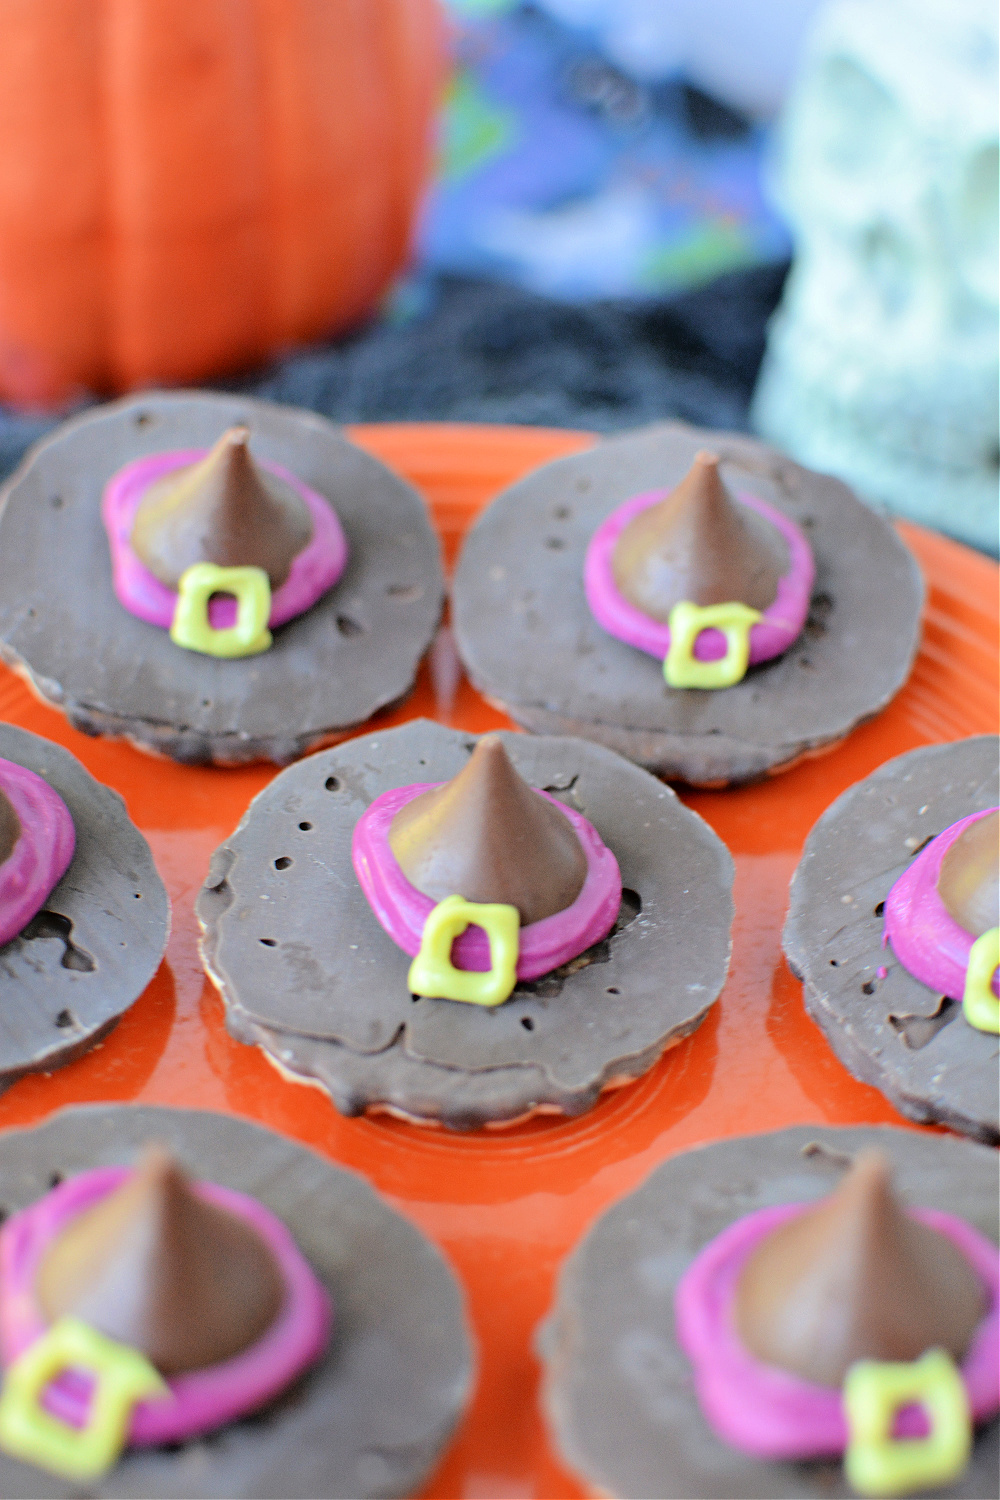 How to Make Halloween Witch Hat Cookies